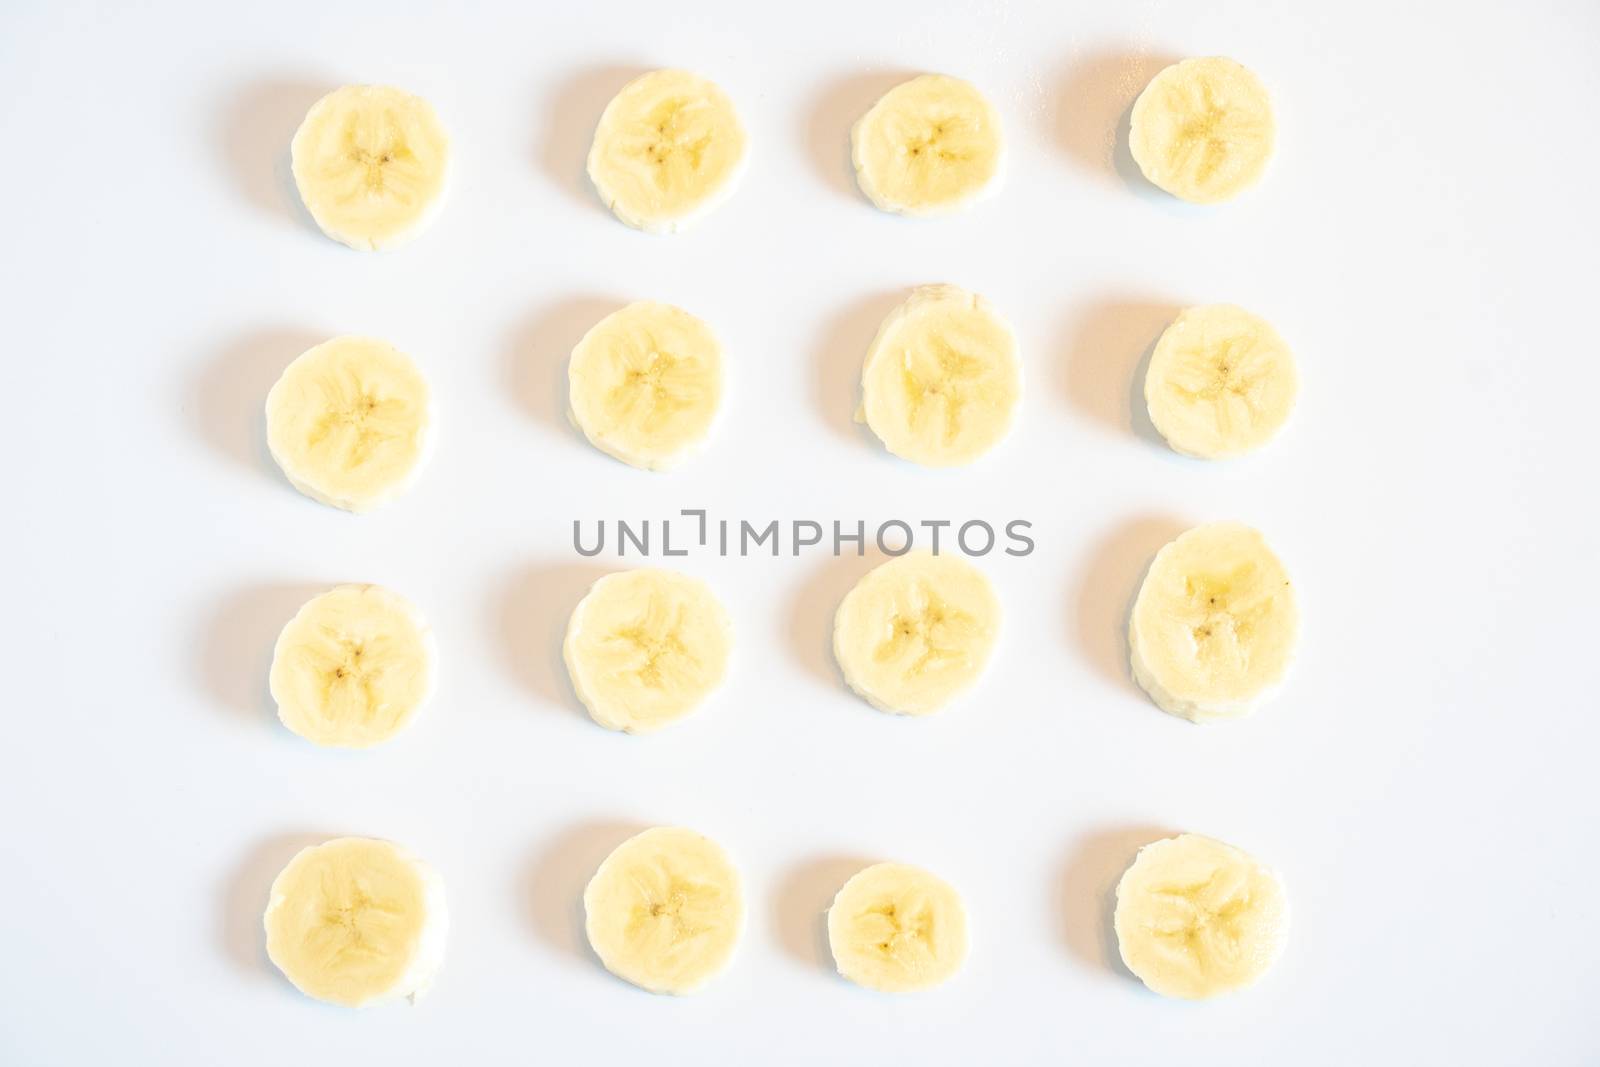 Slices of banana in a square pattern against a plain white background